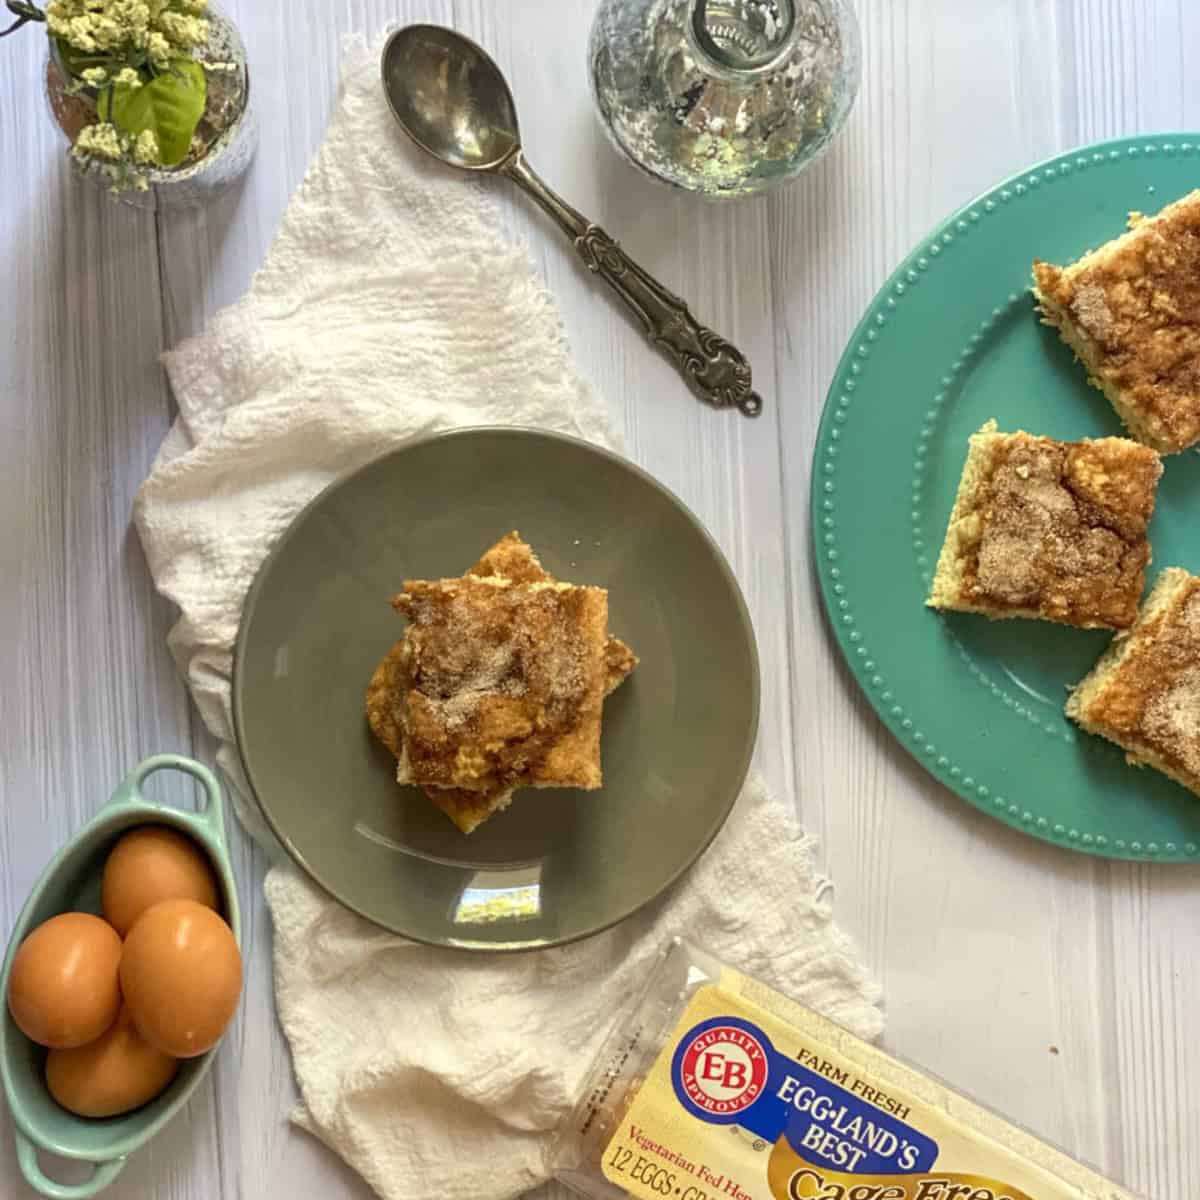 Snickerdoodle biscuits sheet pan breakfast is a baked good that typically has a crumbly coffee cake-like texture with swirls of cinnamon sugar throughout and a cinnamon sugar streusel topping. The breakfast is made with Eggland's best eggs which are featured in the photo. 